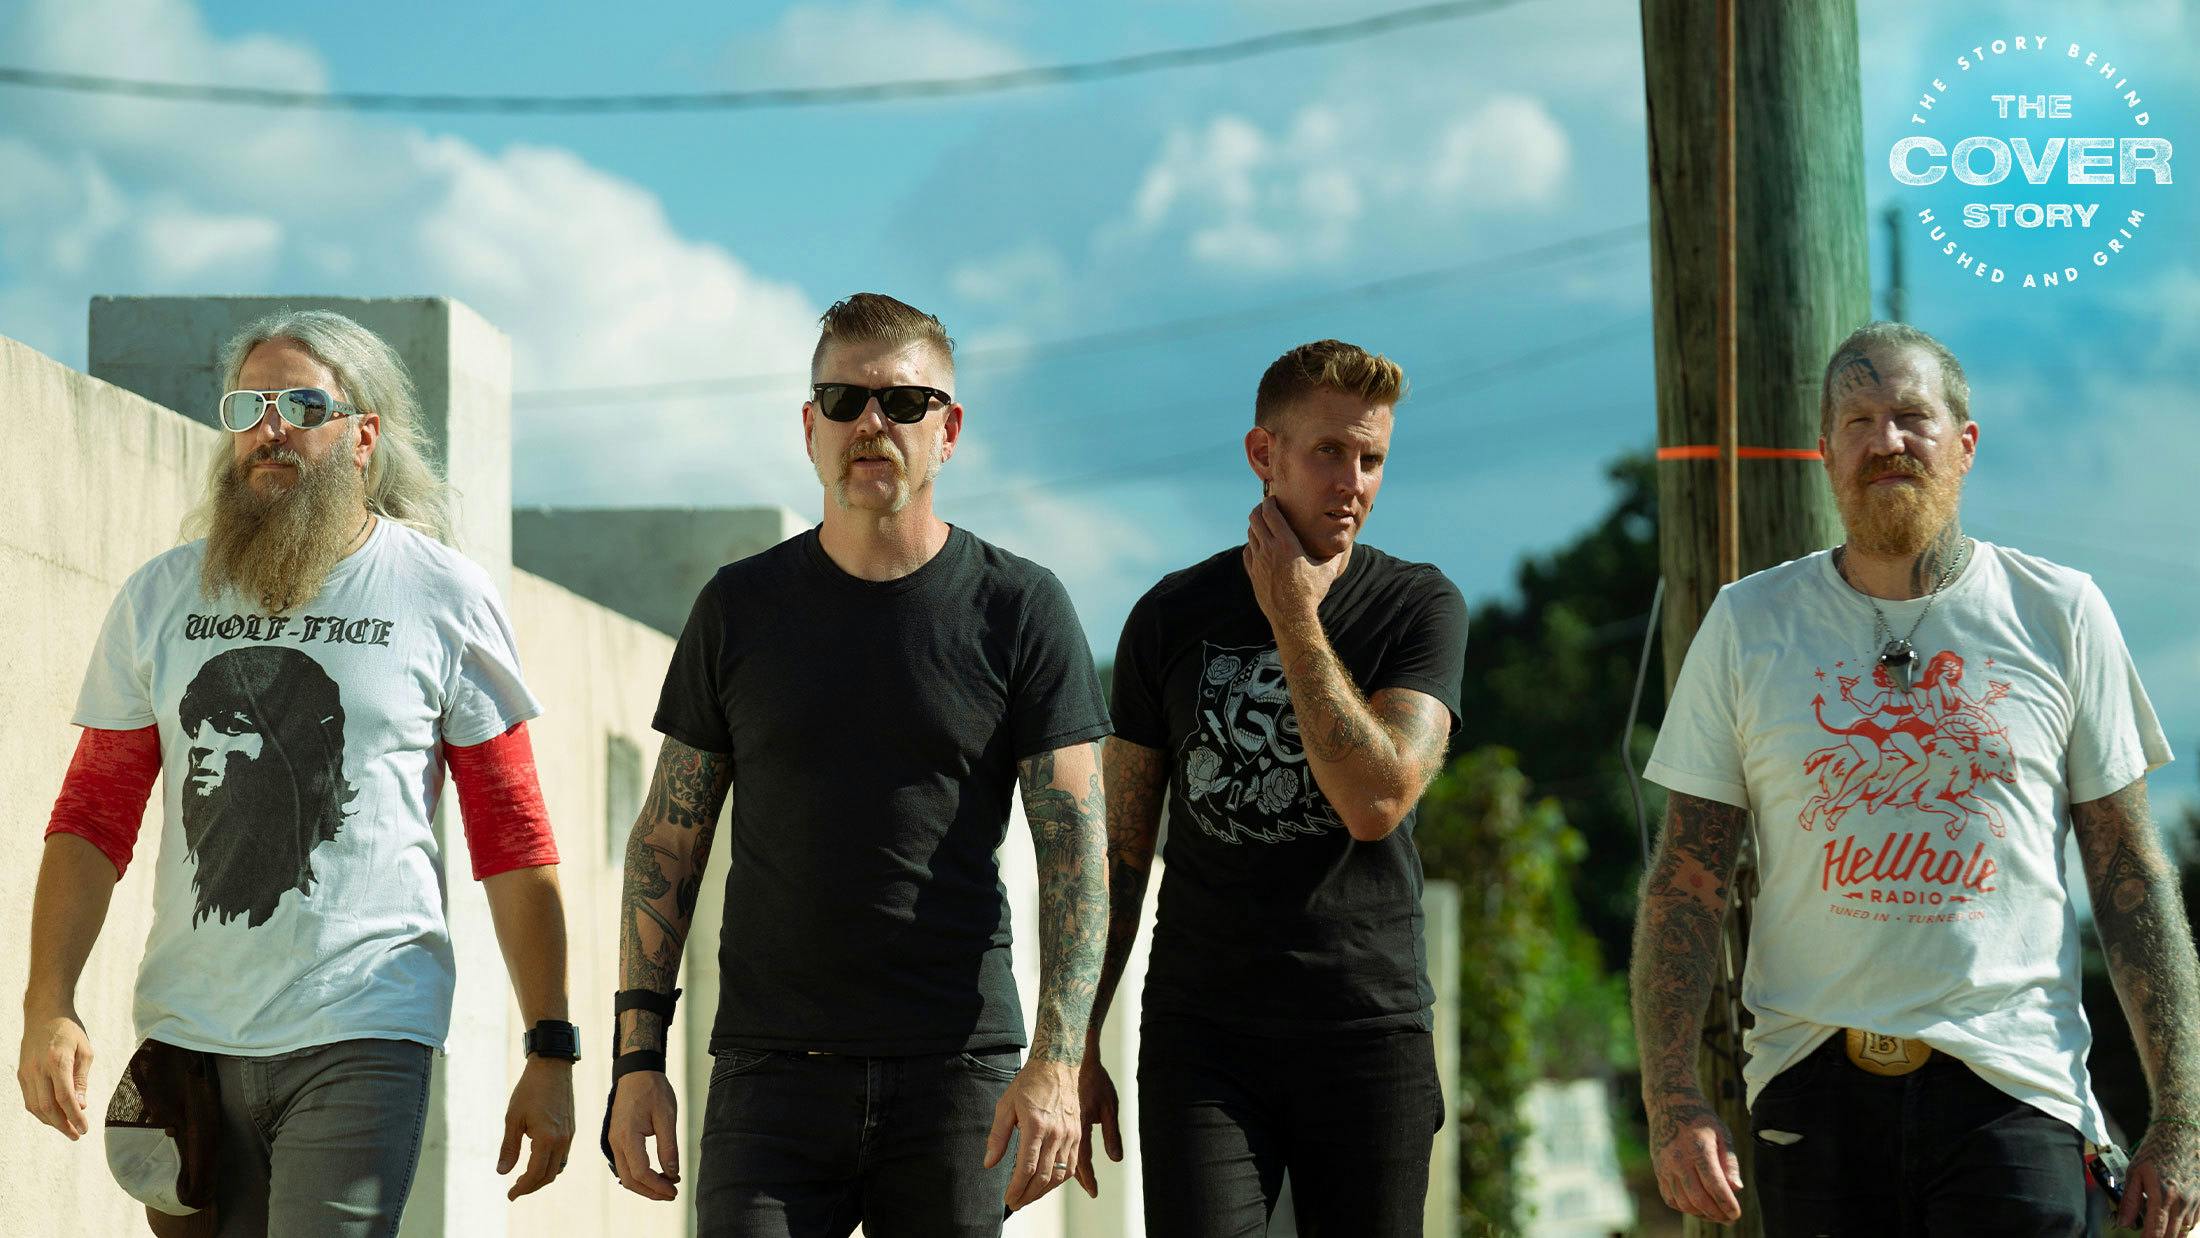 How collective grief shaped Mastodon’s most grandiose, gut-wrenching album ever